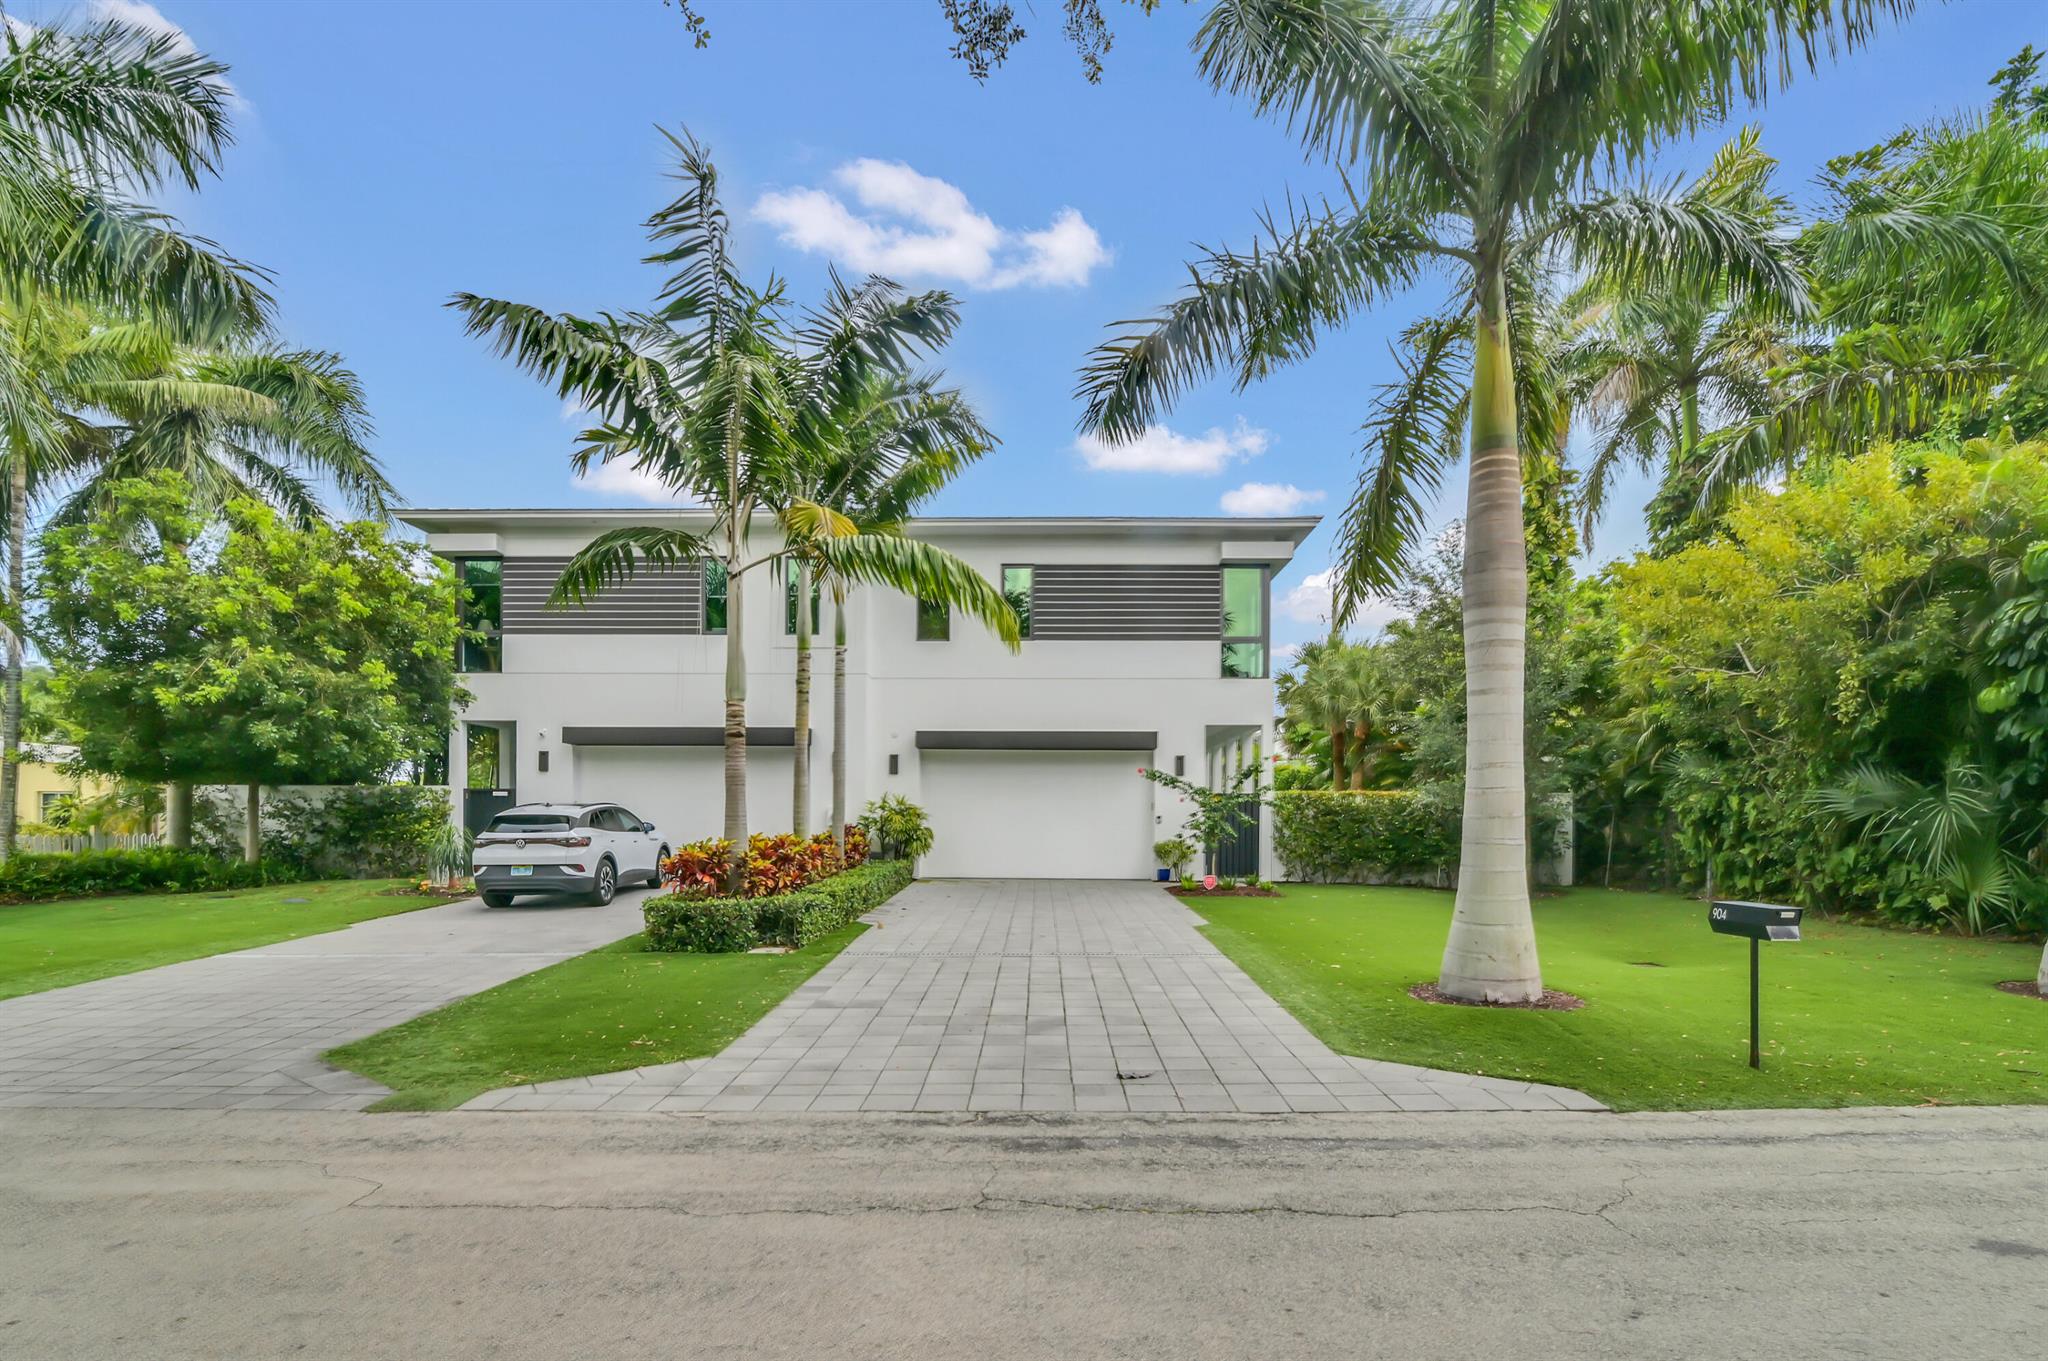 View Delray Beach, FL 33483 townhome